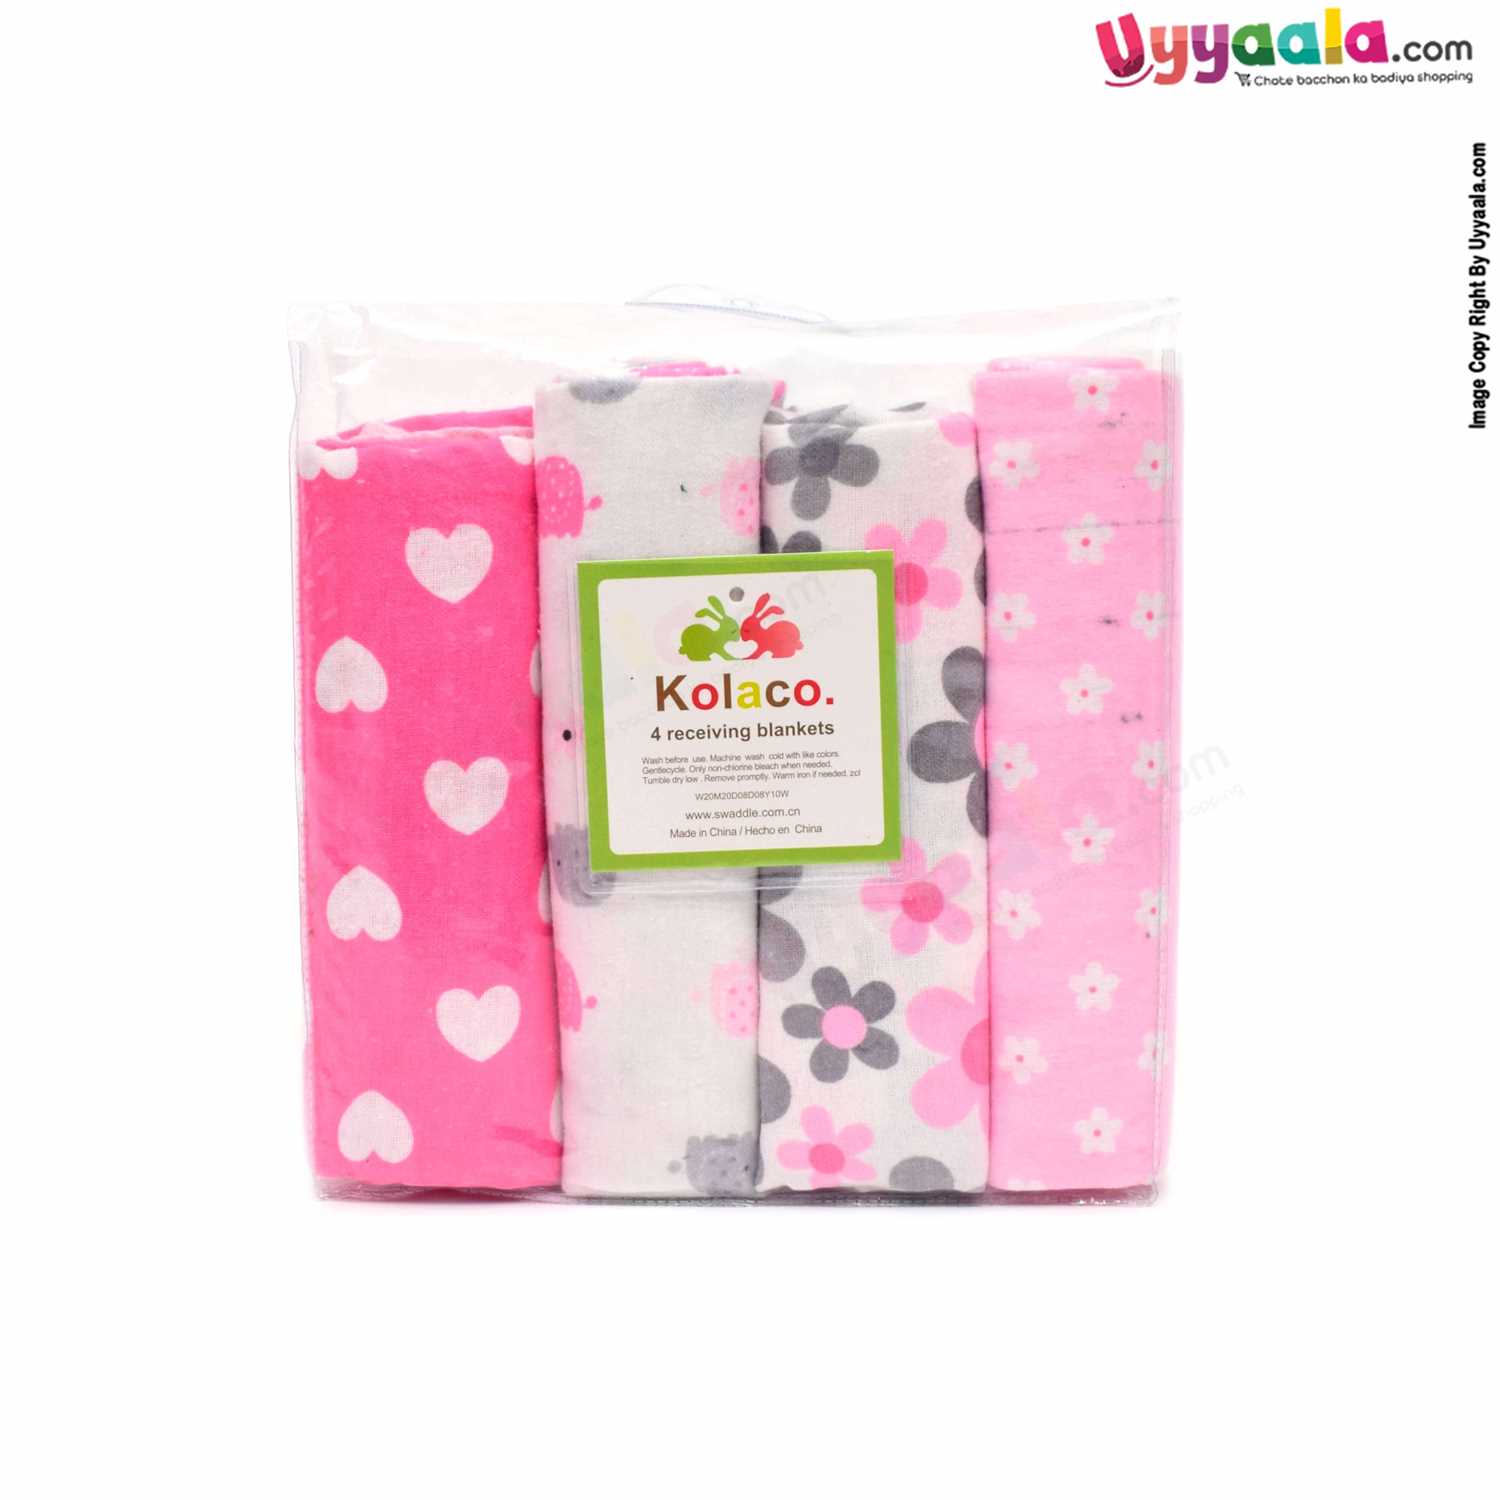 KOLACO Baby Soft Bath Towel Pack of 4 with Print 0+m Age, Size (74*73) - MultiColor